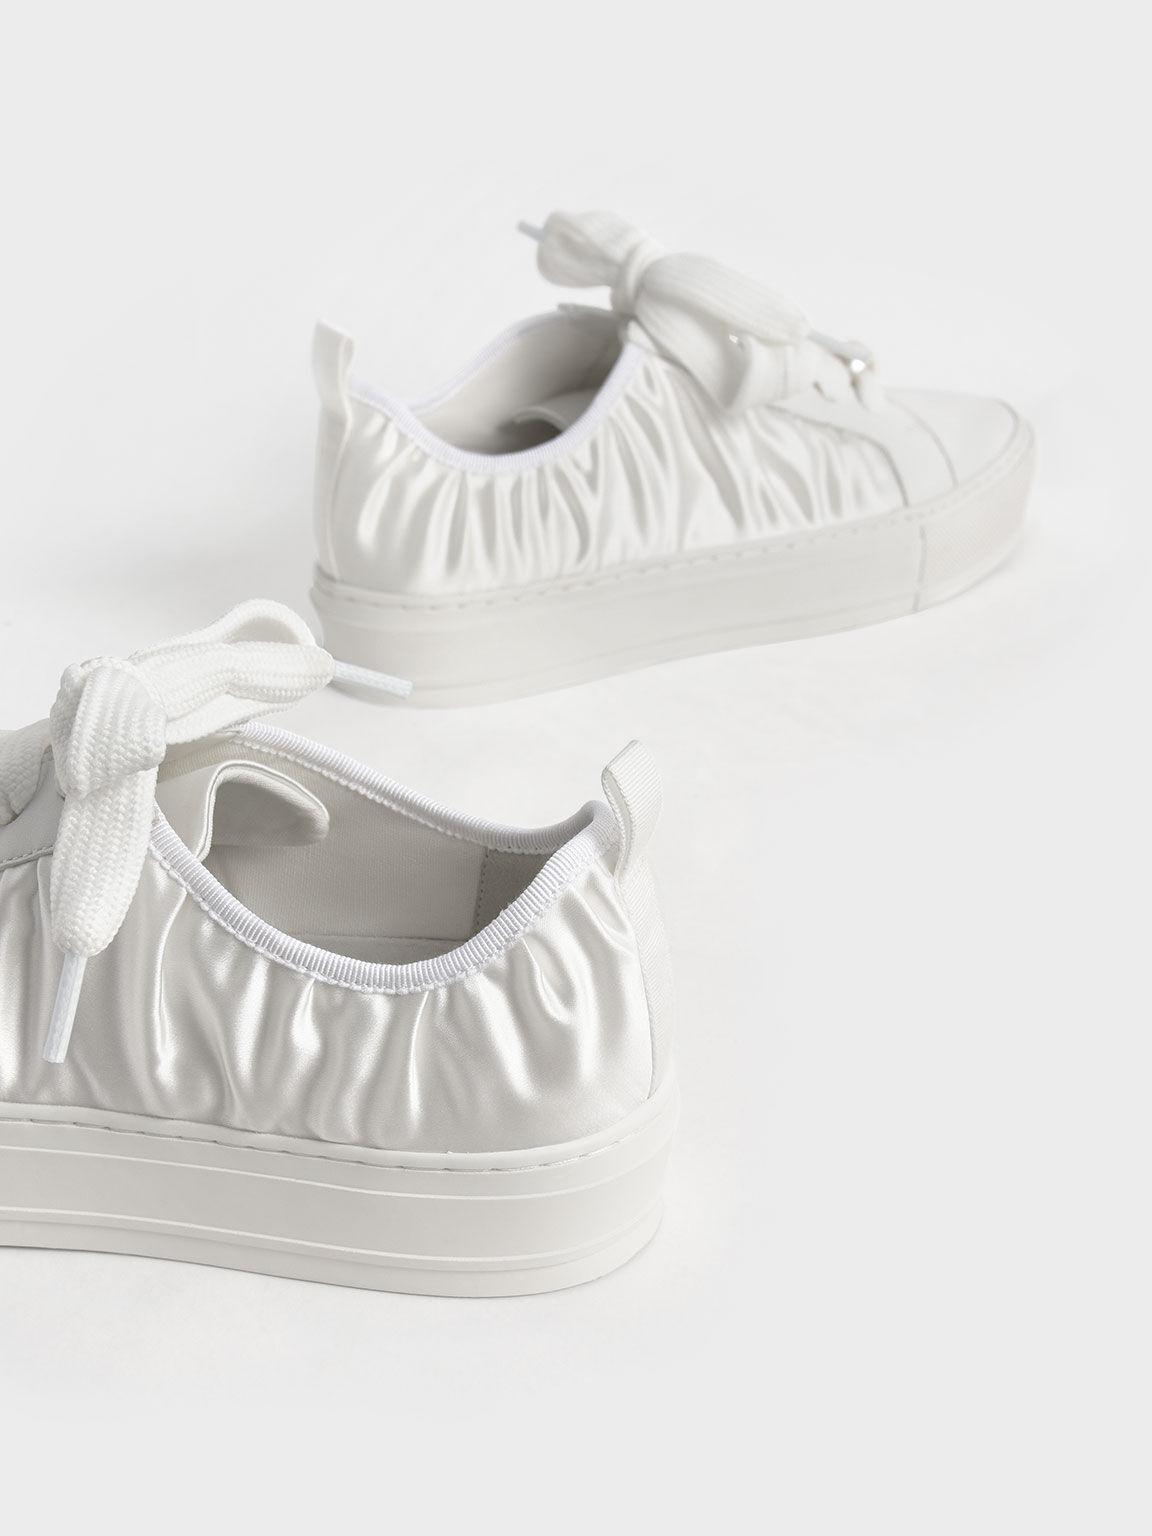 The Bridal Collection: Sneakers Blythe Leather & Satin Bead-Embellished, White, hi-res